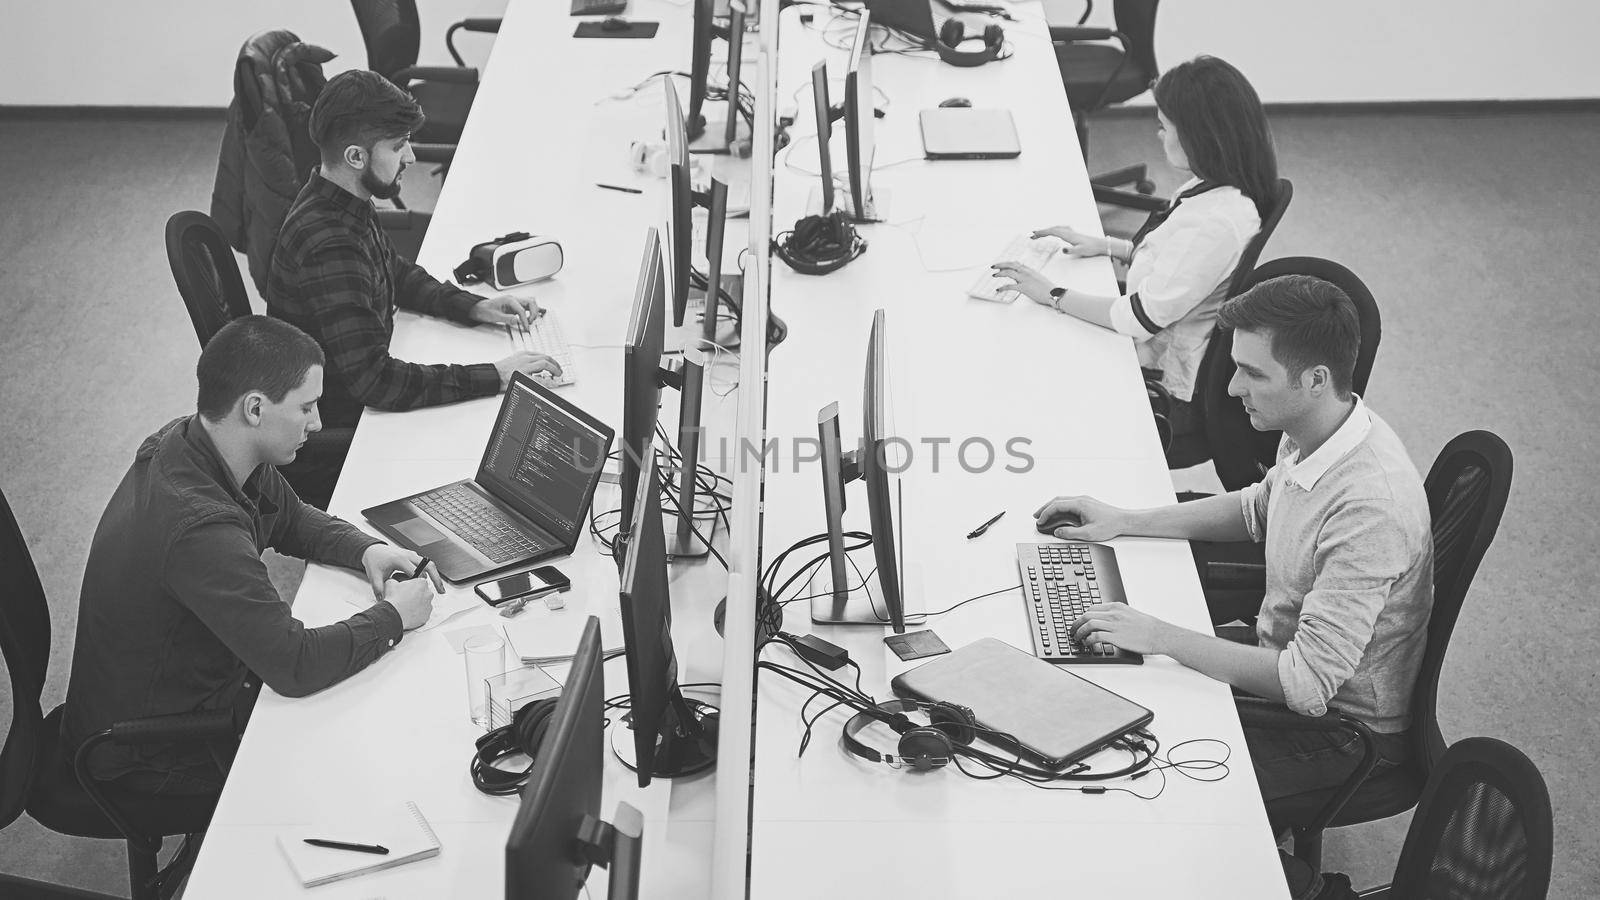 Young professionals working in modern office. Group of developers or programmers sitting at desks focused on desktops and laptops in IT company open space. Team at work. High quality image.